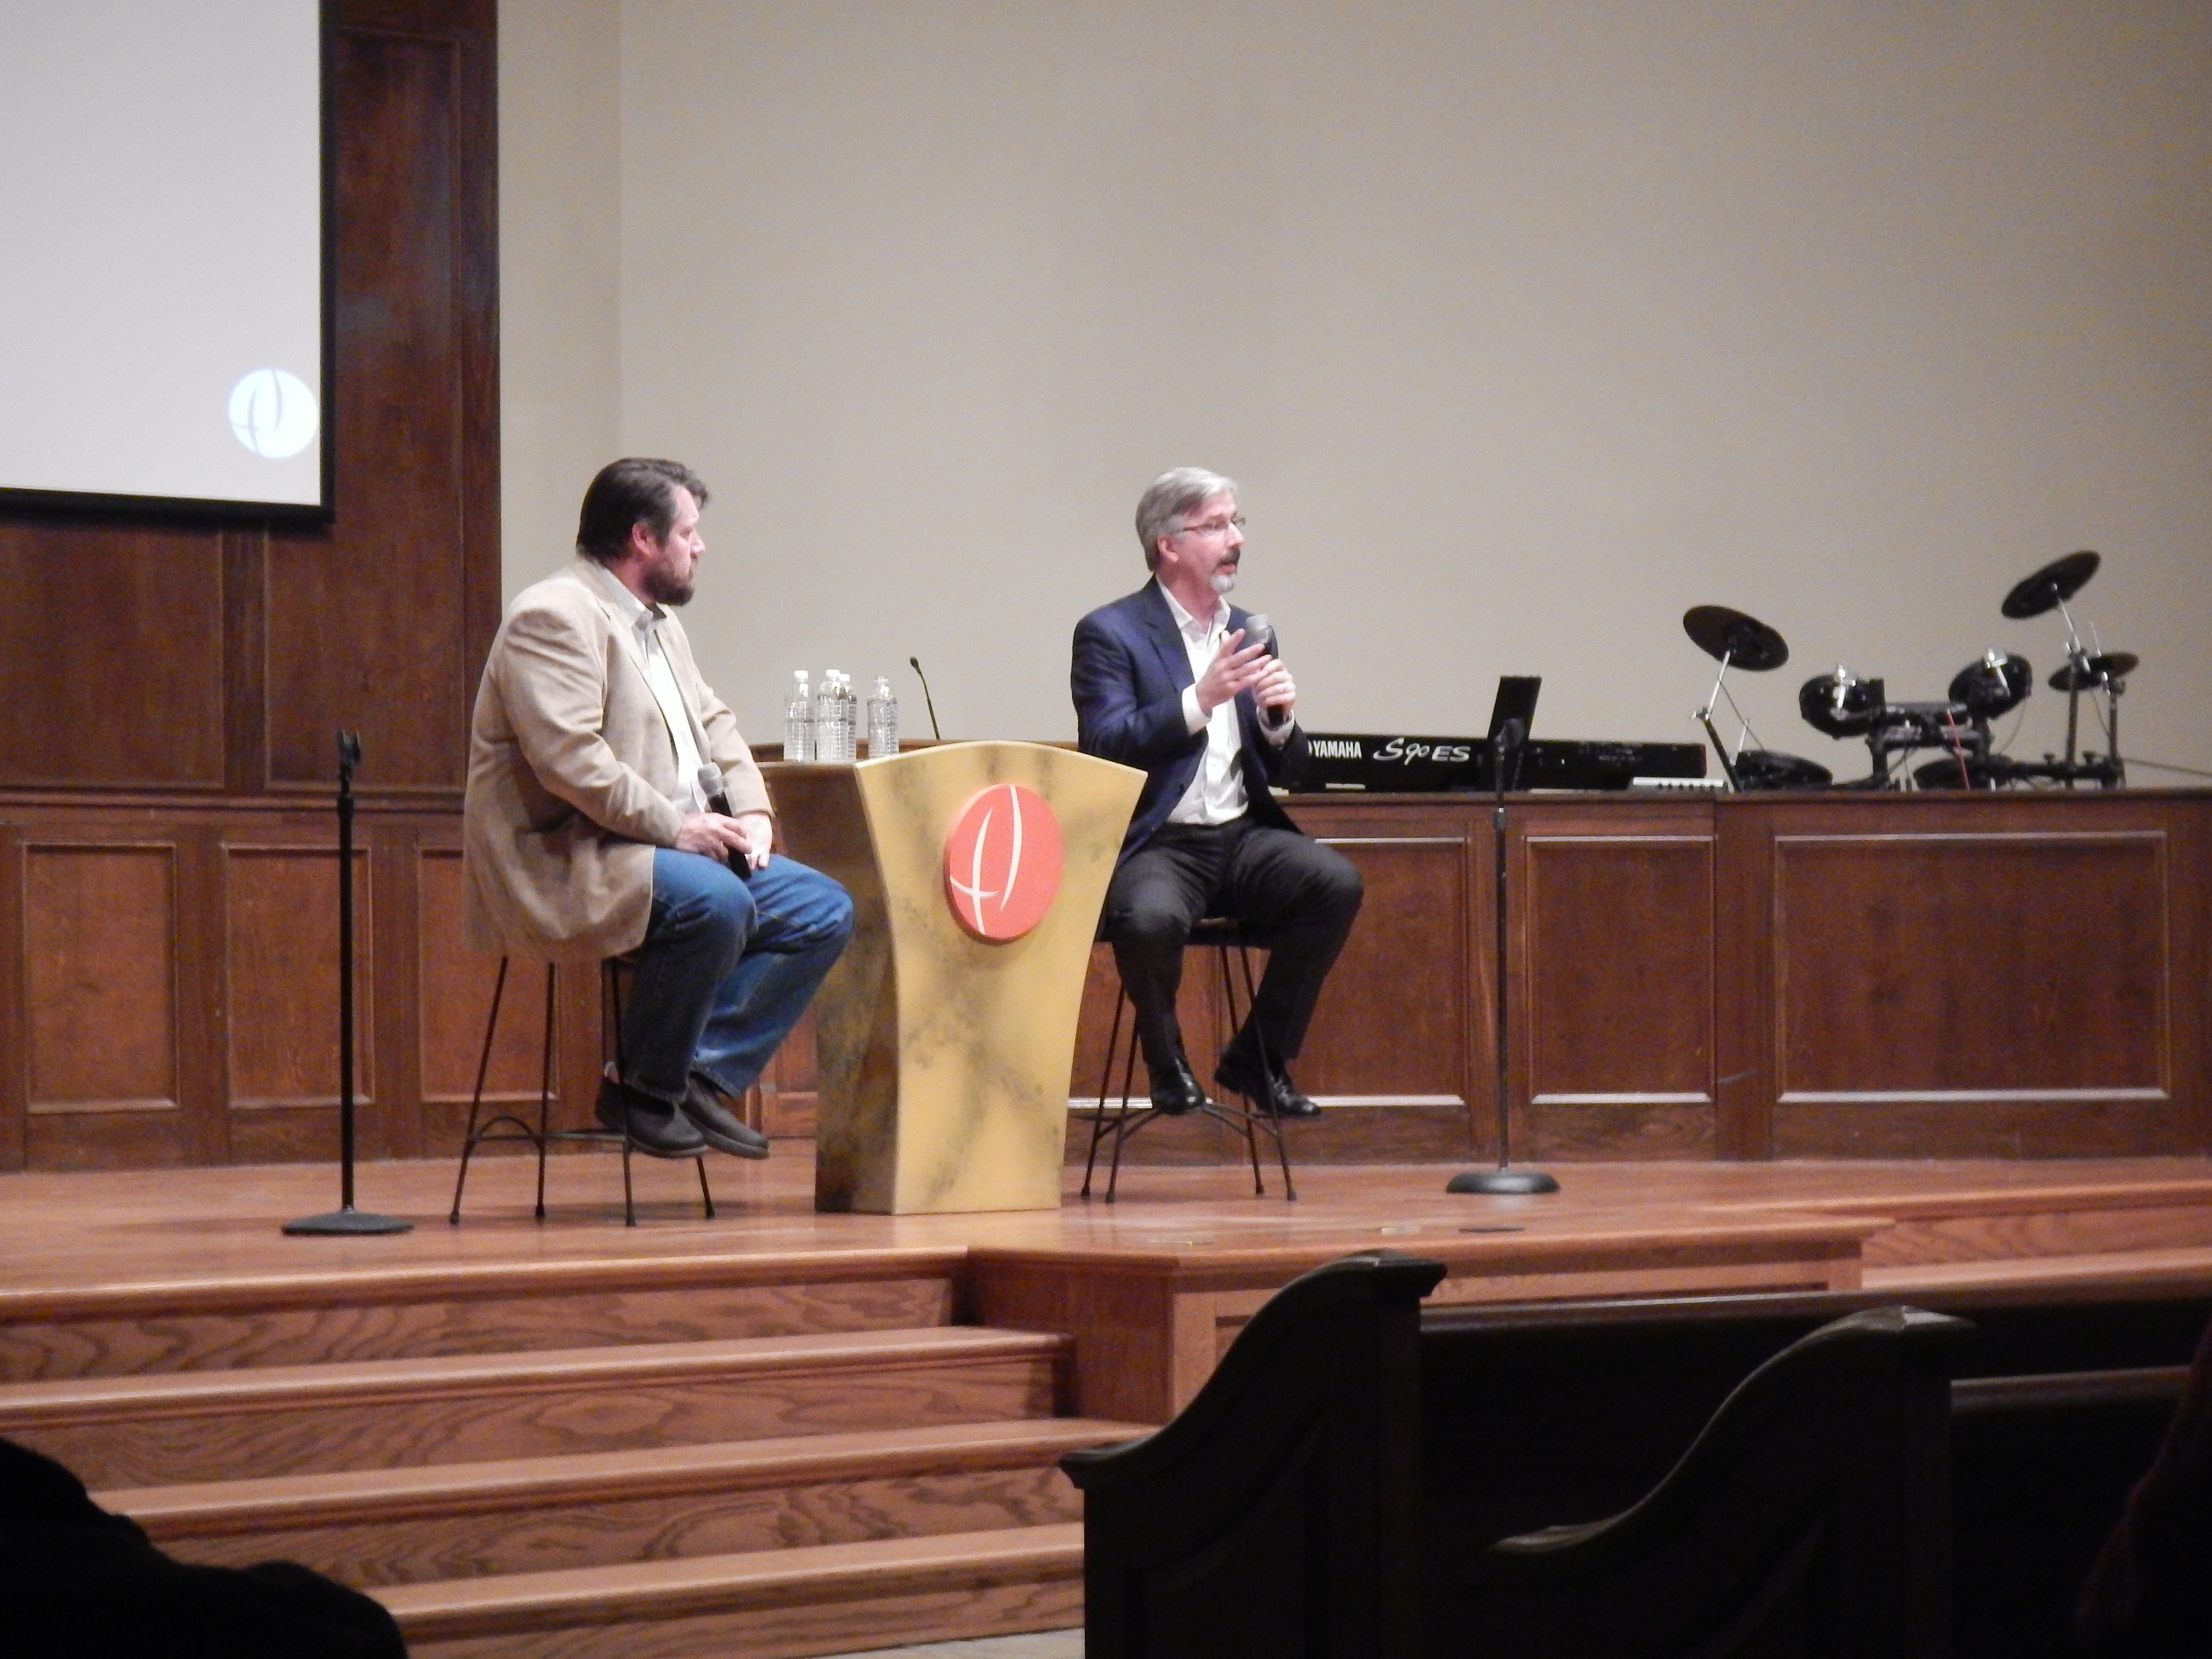 Rick Burgess and Larry Taunton speak about Christian parenting in the modern age.